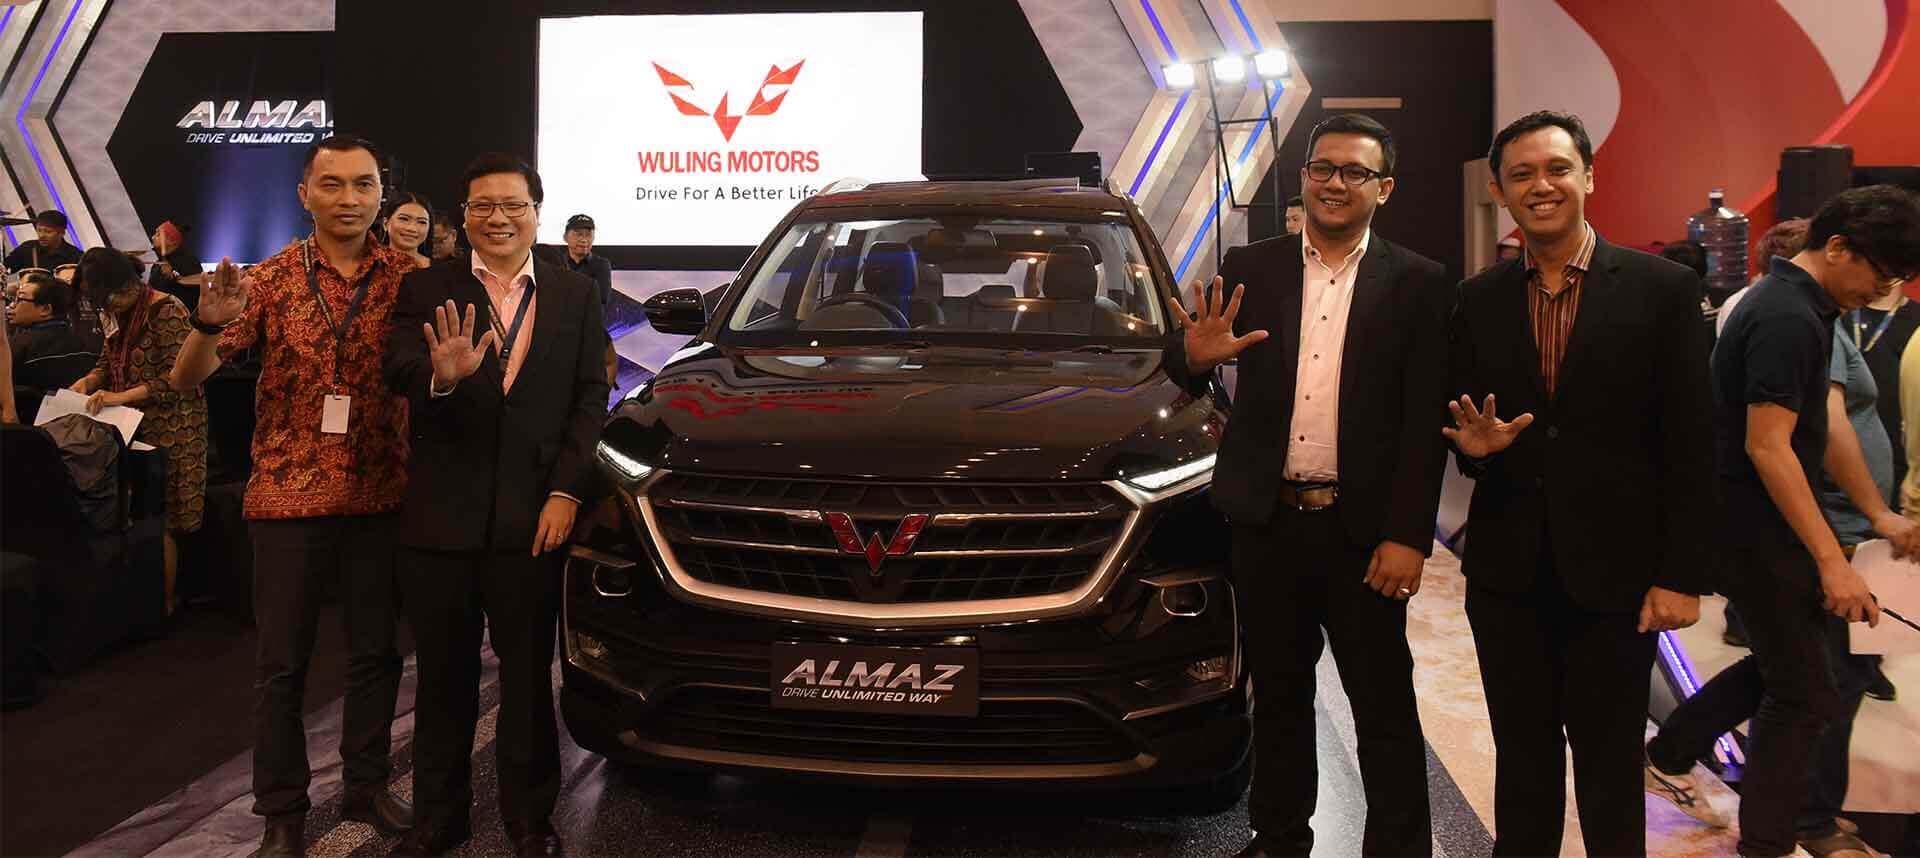 Image Wuling Presents Complete Product Line Up in GIIAS Surabaya 2019